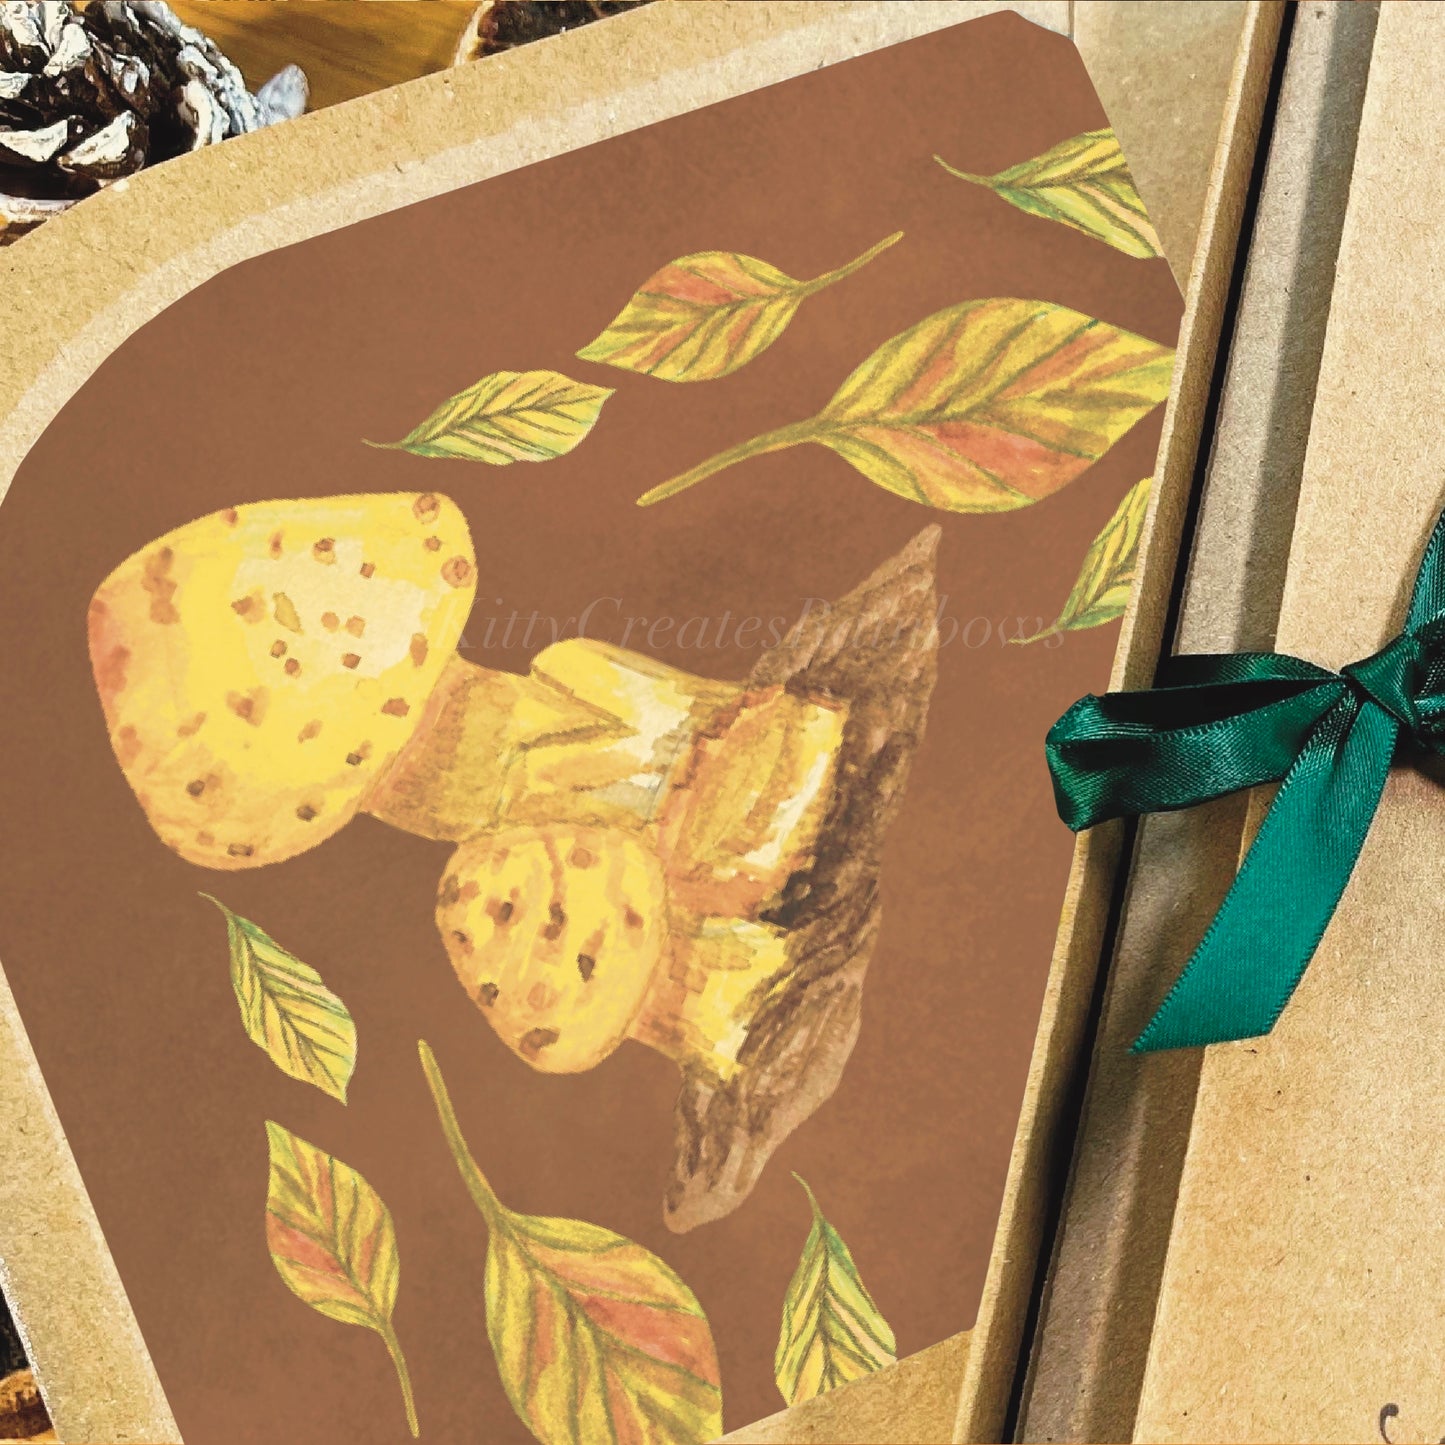 Fall forage mushroom decorative inlay with mushrooms and leaves on the inside of a manila envelope